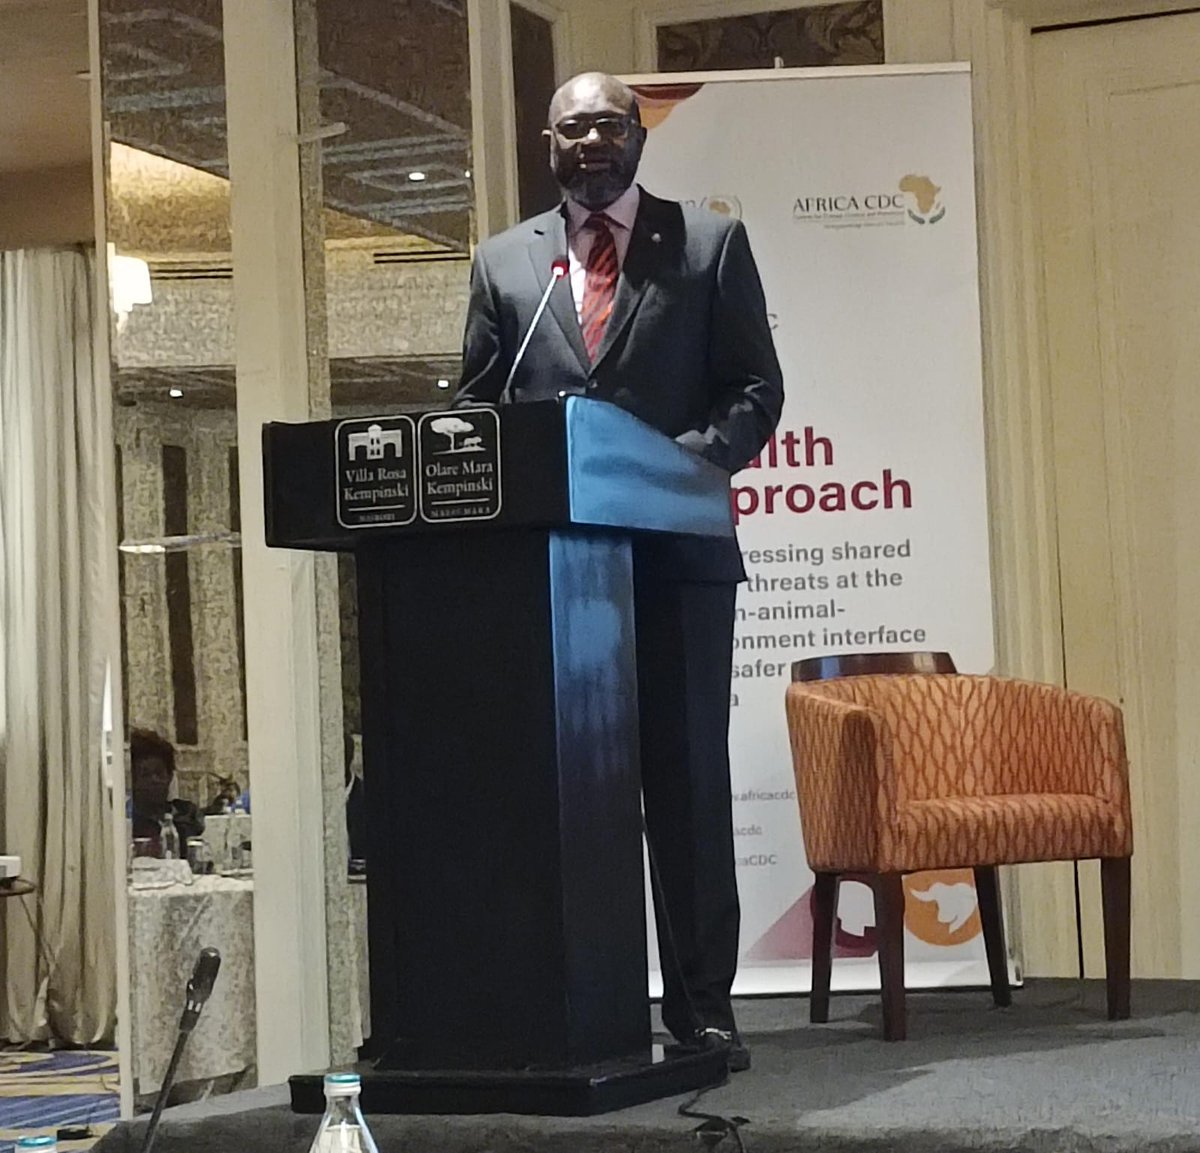 At the @AfricaCDC #OneHealth approach & climate health threats side event, @laktarr001 noted: ✅ the conversation on climate & health nexus should be an agenda item at COP28. ✅ use indigenous knowledge ✅ Translate climate & health priorities into measurable action #ACS2023